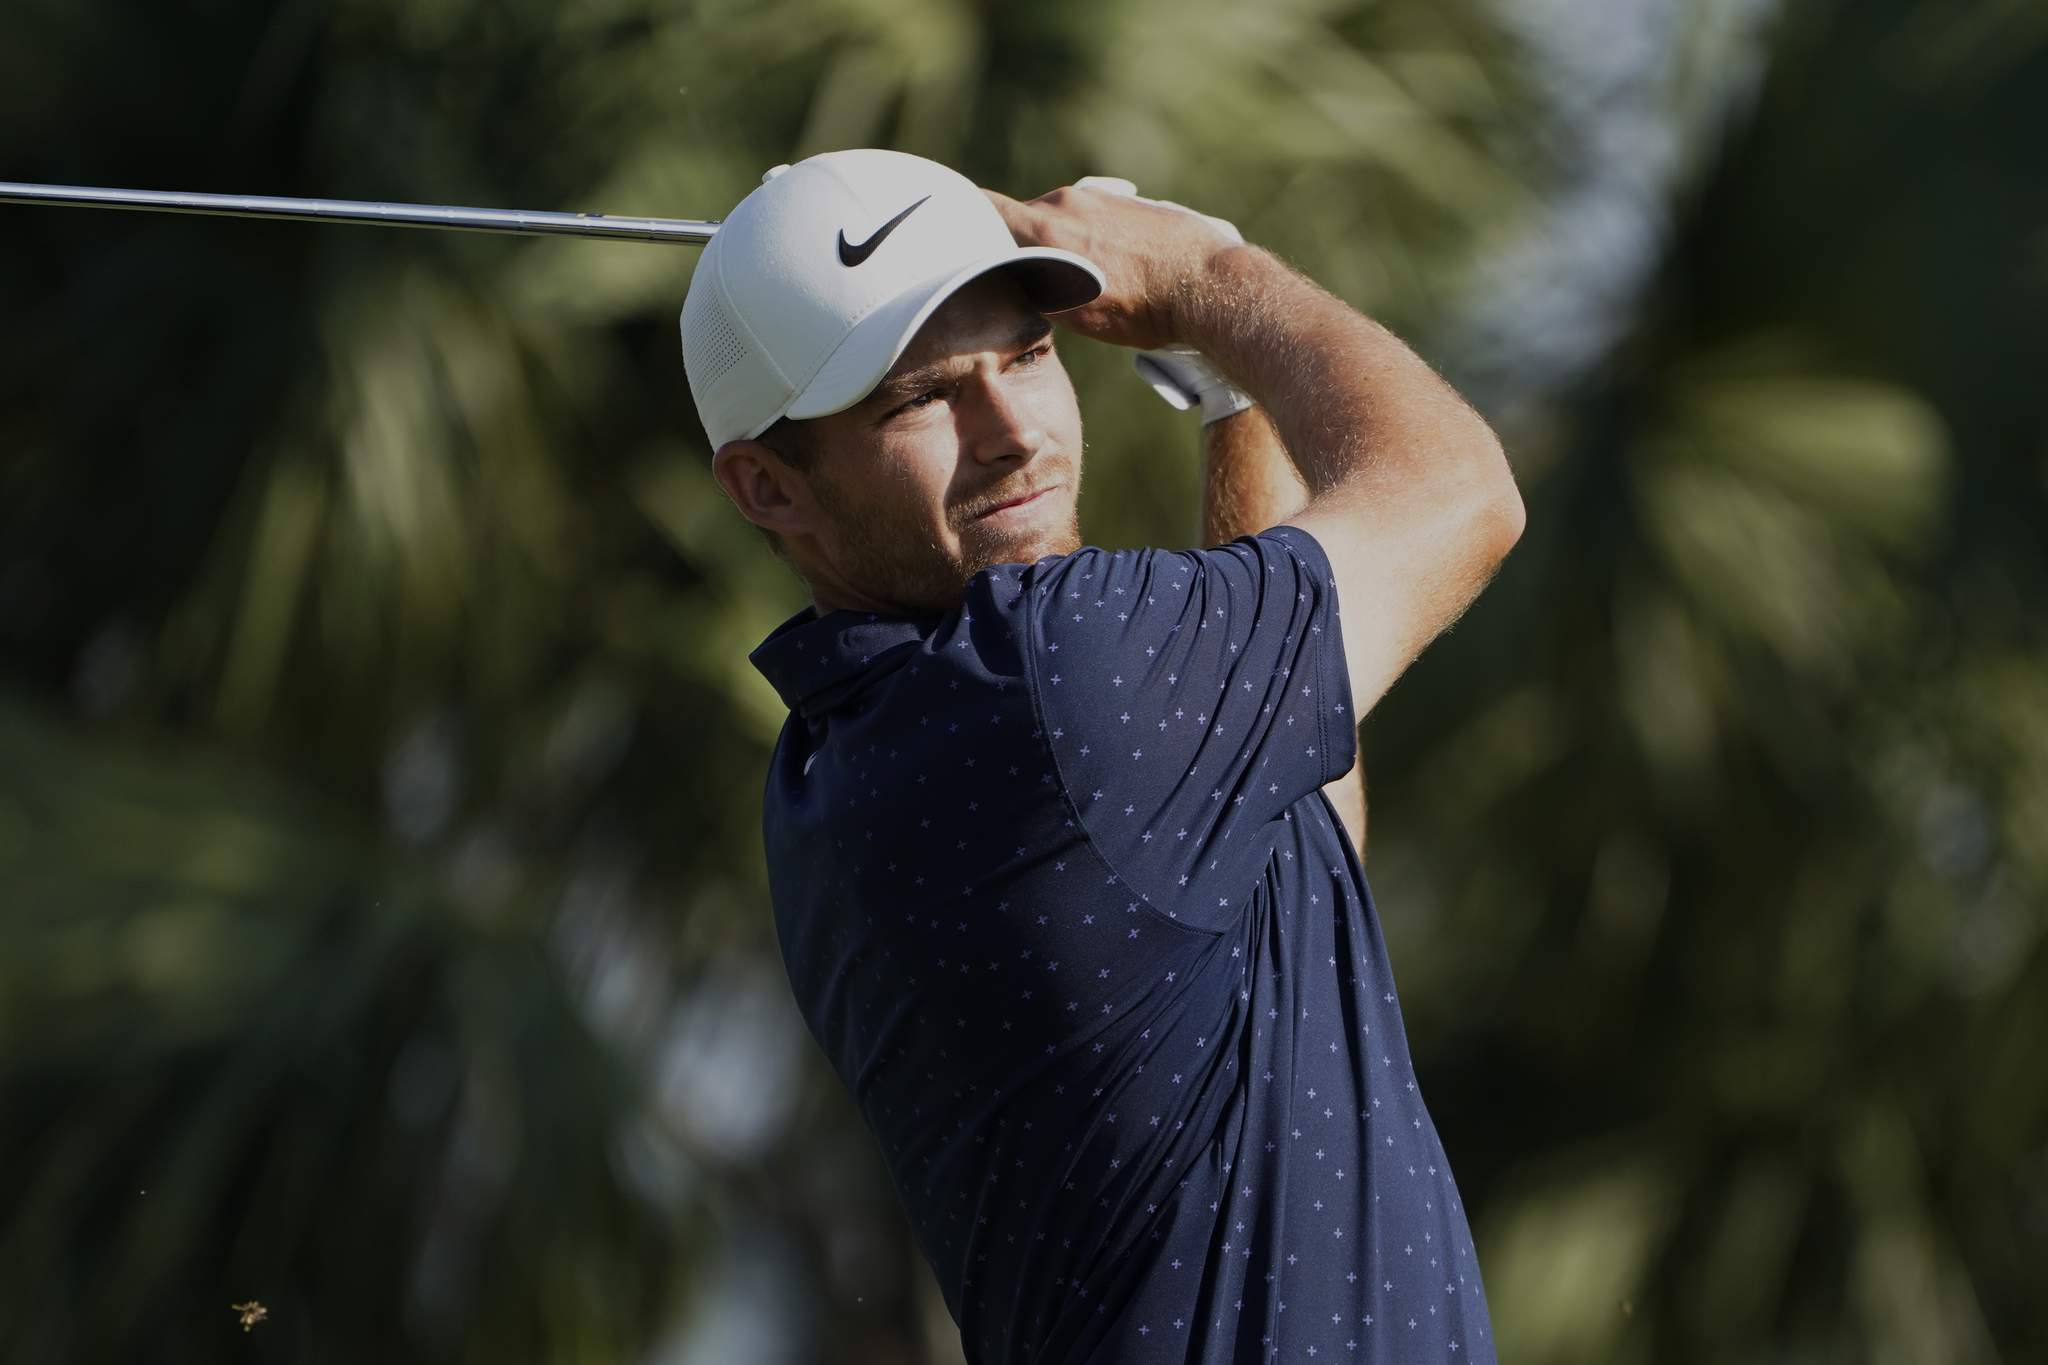 Wise takes three-shot lead at midway point of Honda Classic